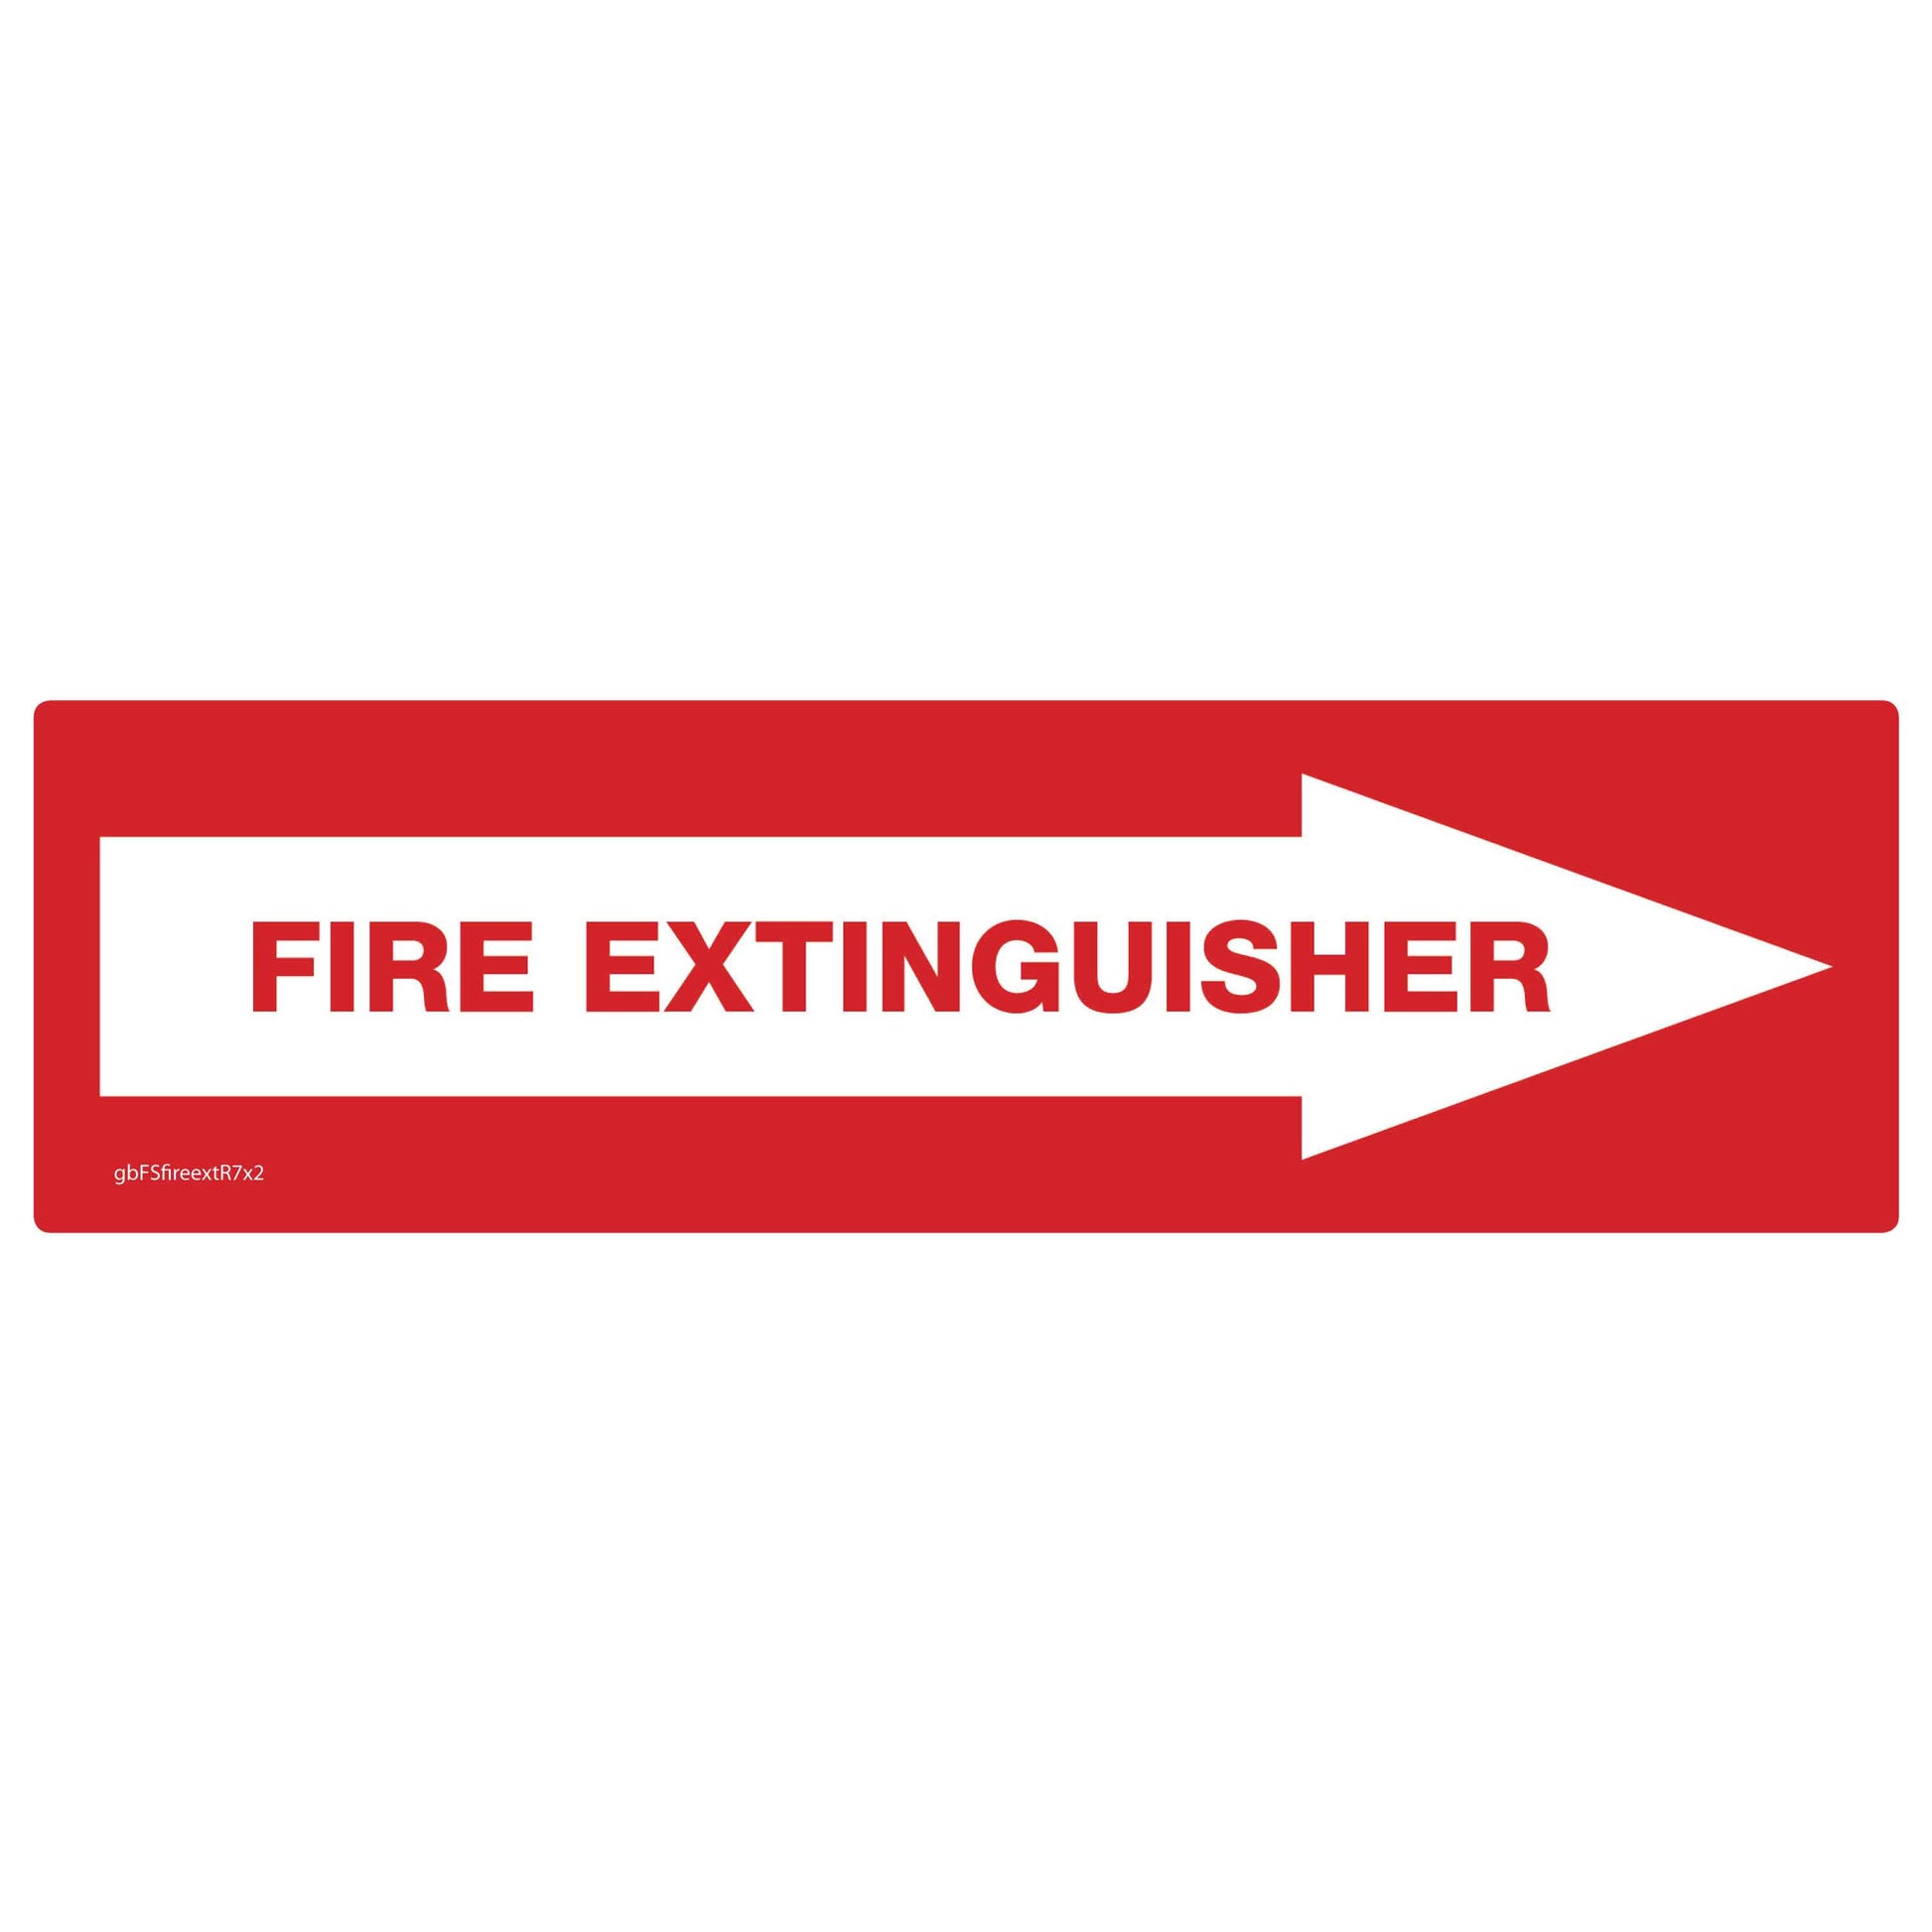 Fire Extinguisher Pointing Right Decal. 7 inches by 2 inches in size.